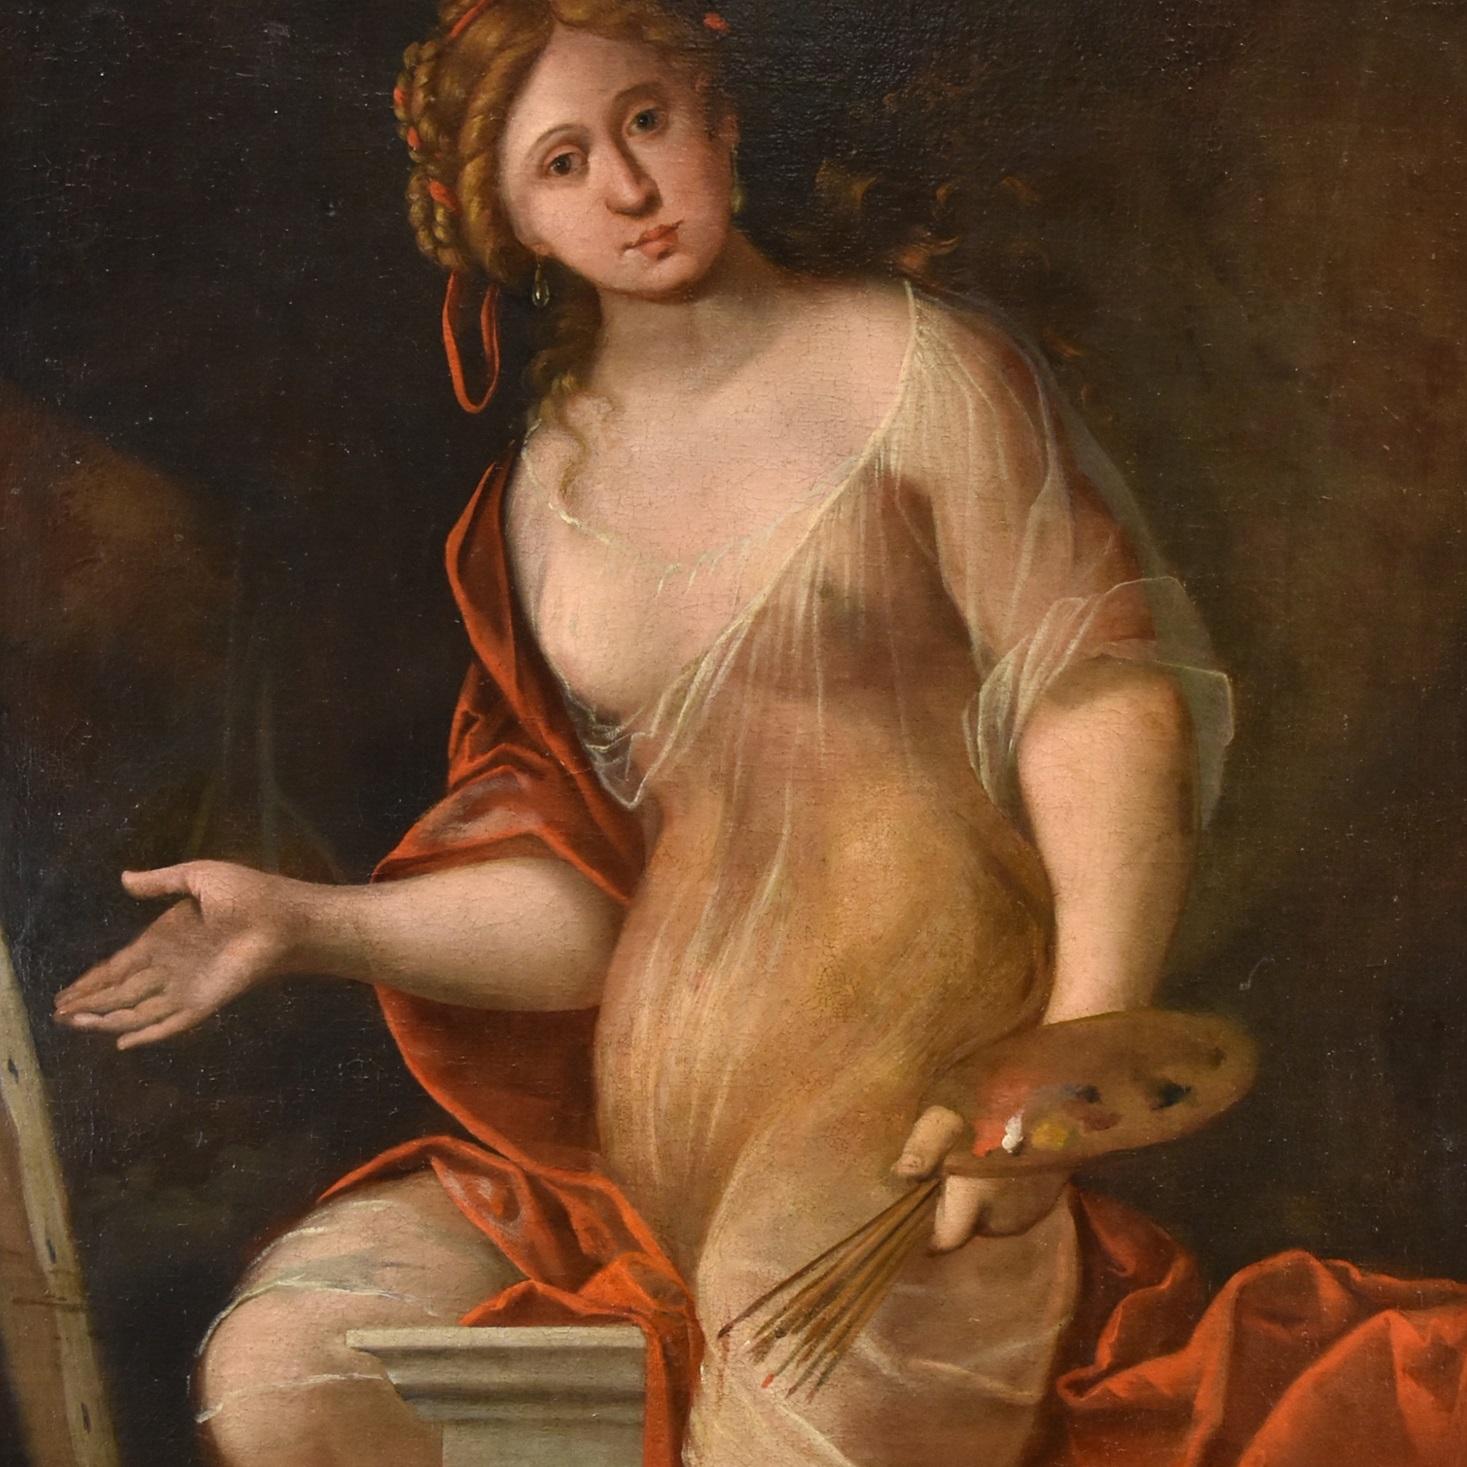 Terwesten Woman Allegory Art Paint Oil on canvas 17/18th Century Old master  - Old Masters Painting by Mattheus Terwesten (the Hague, 1670 - 1757)